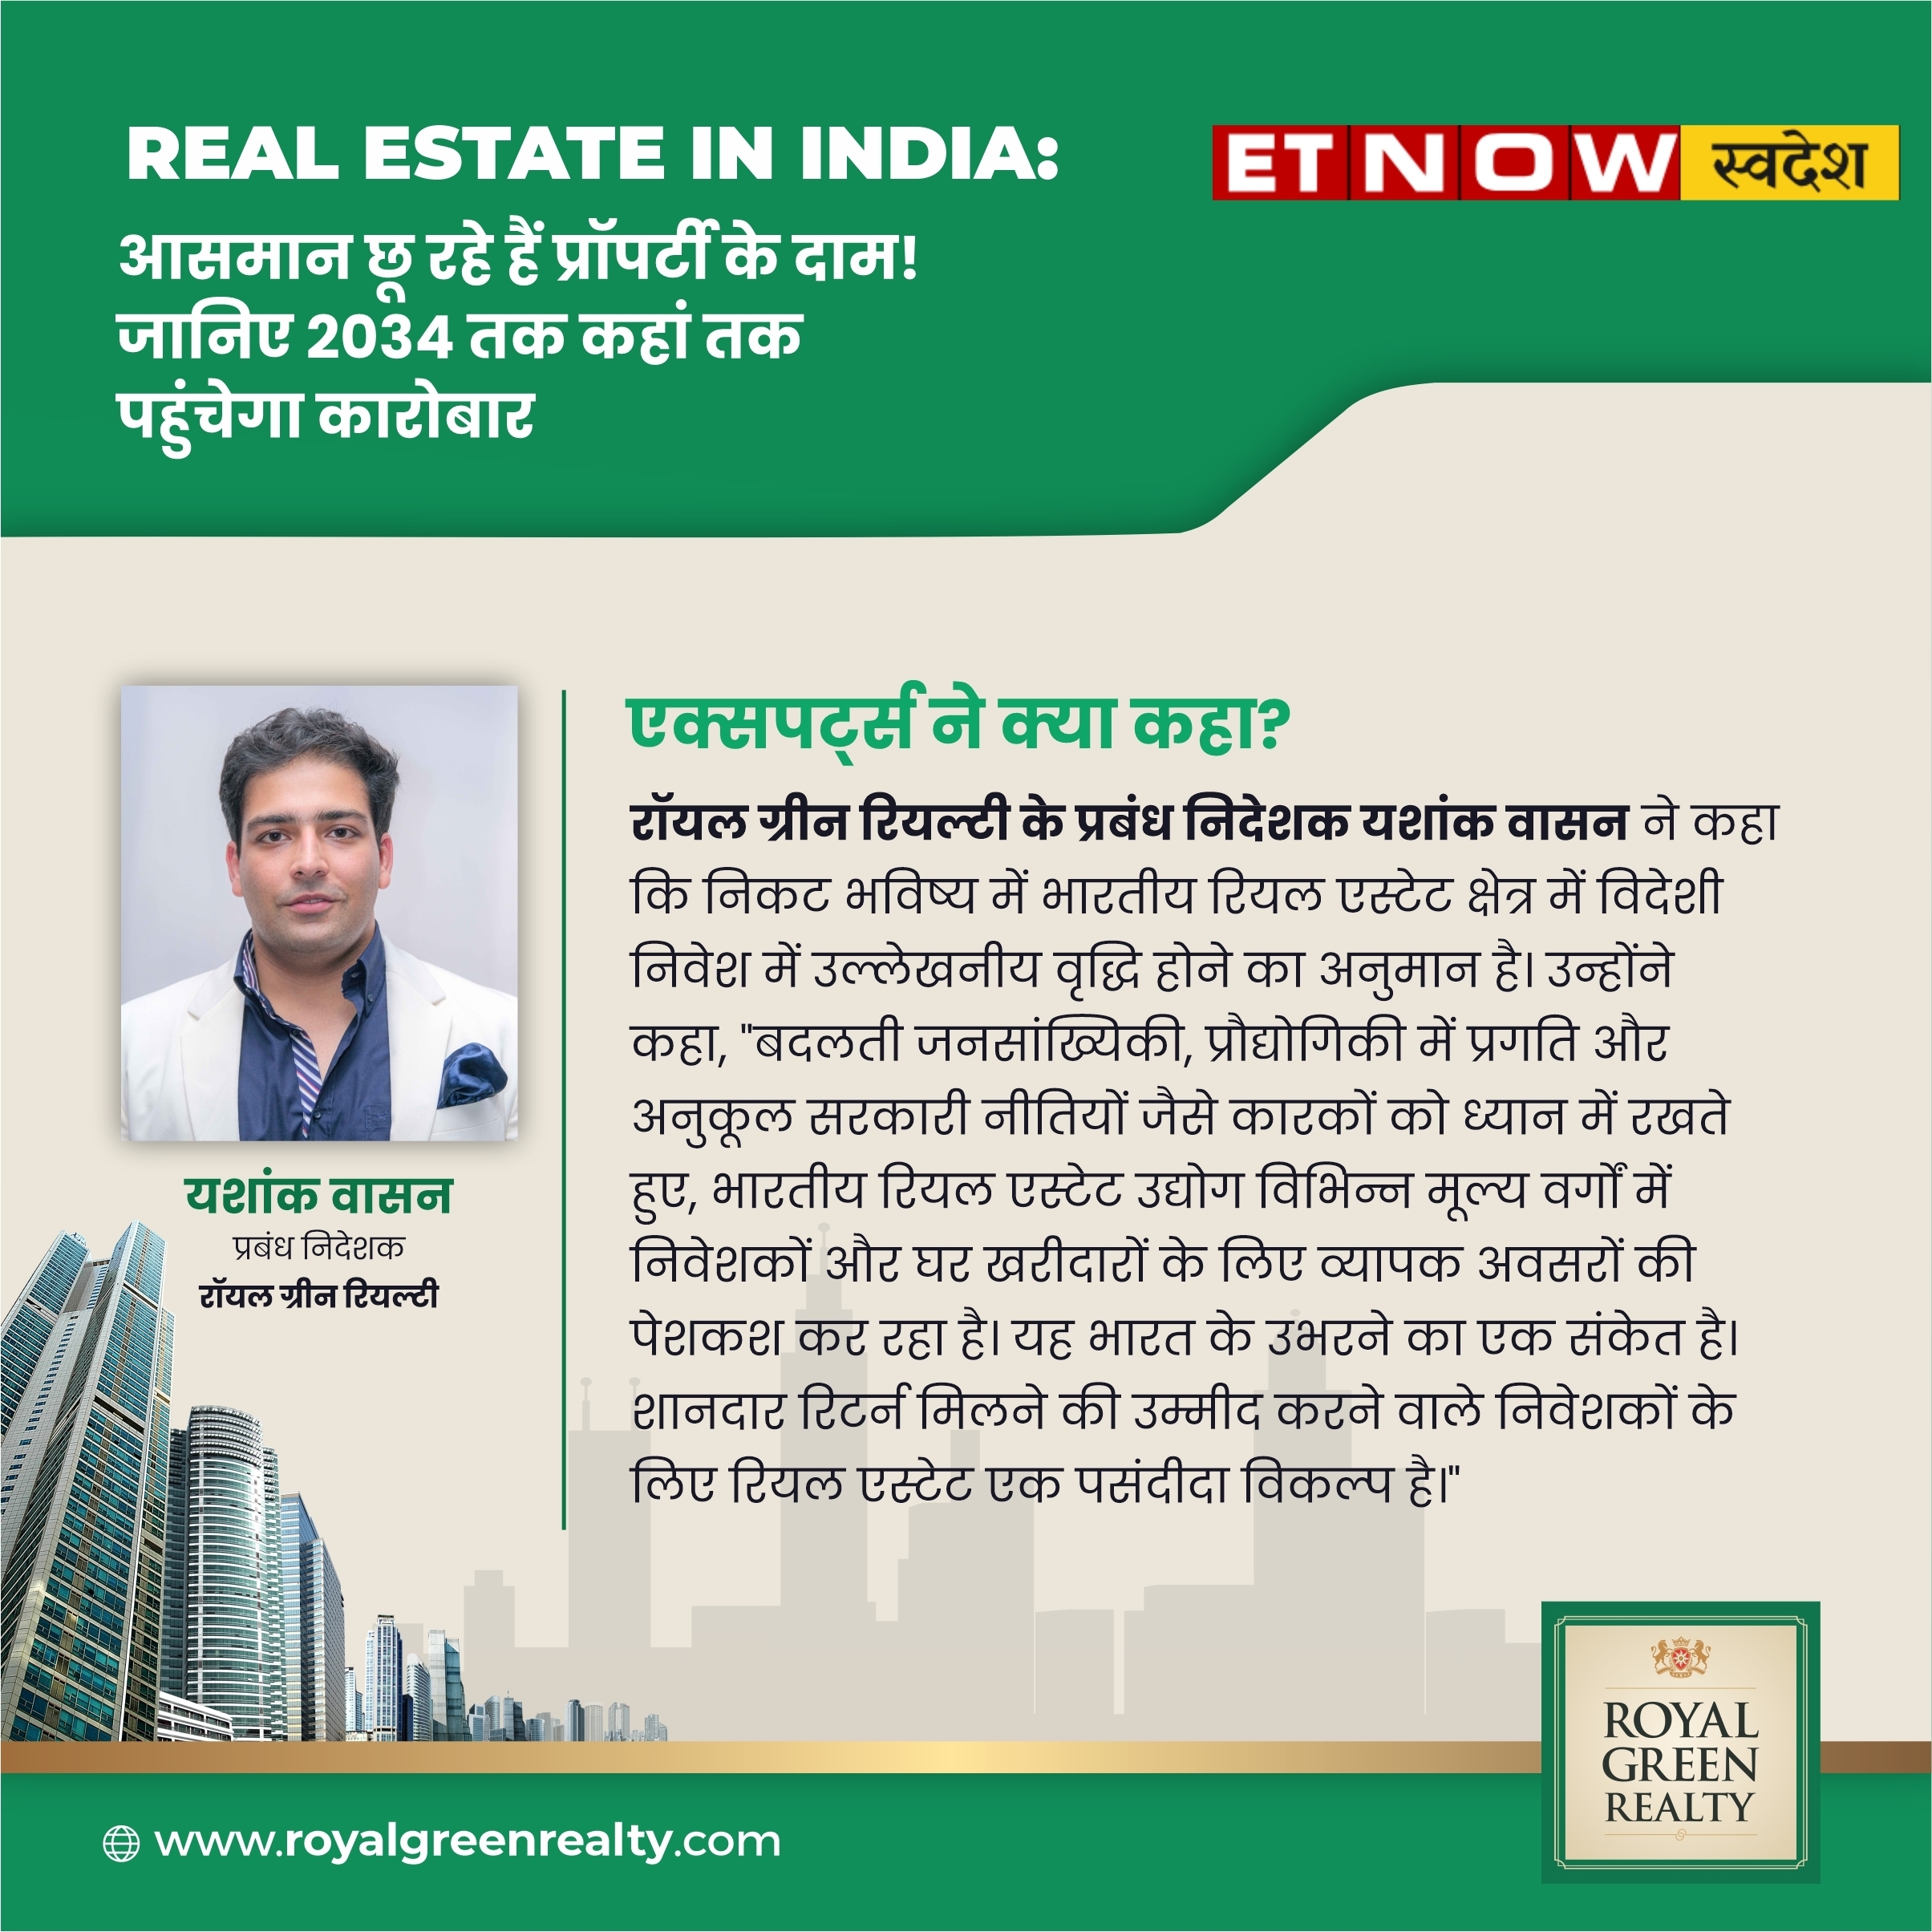 Indian Real estate dynamics by 2034